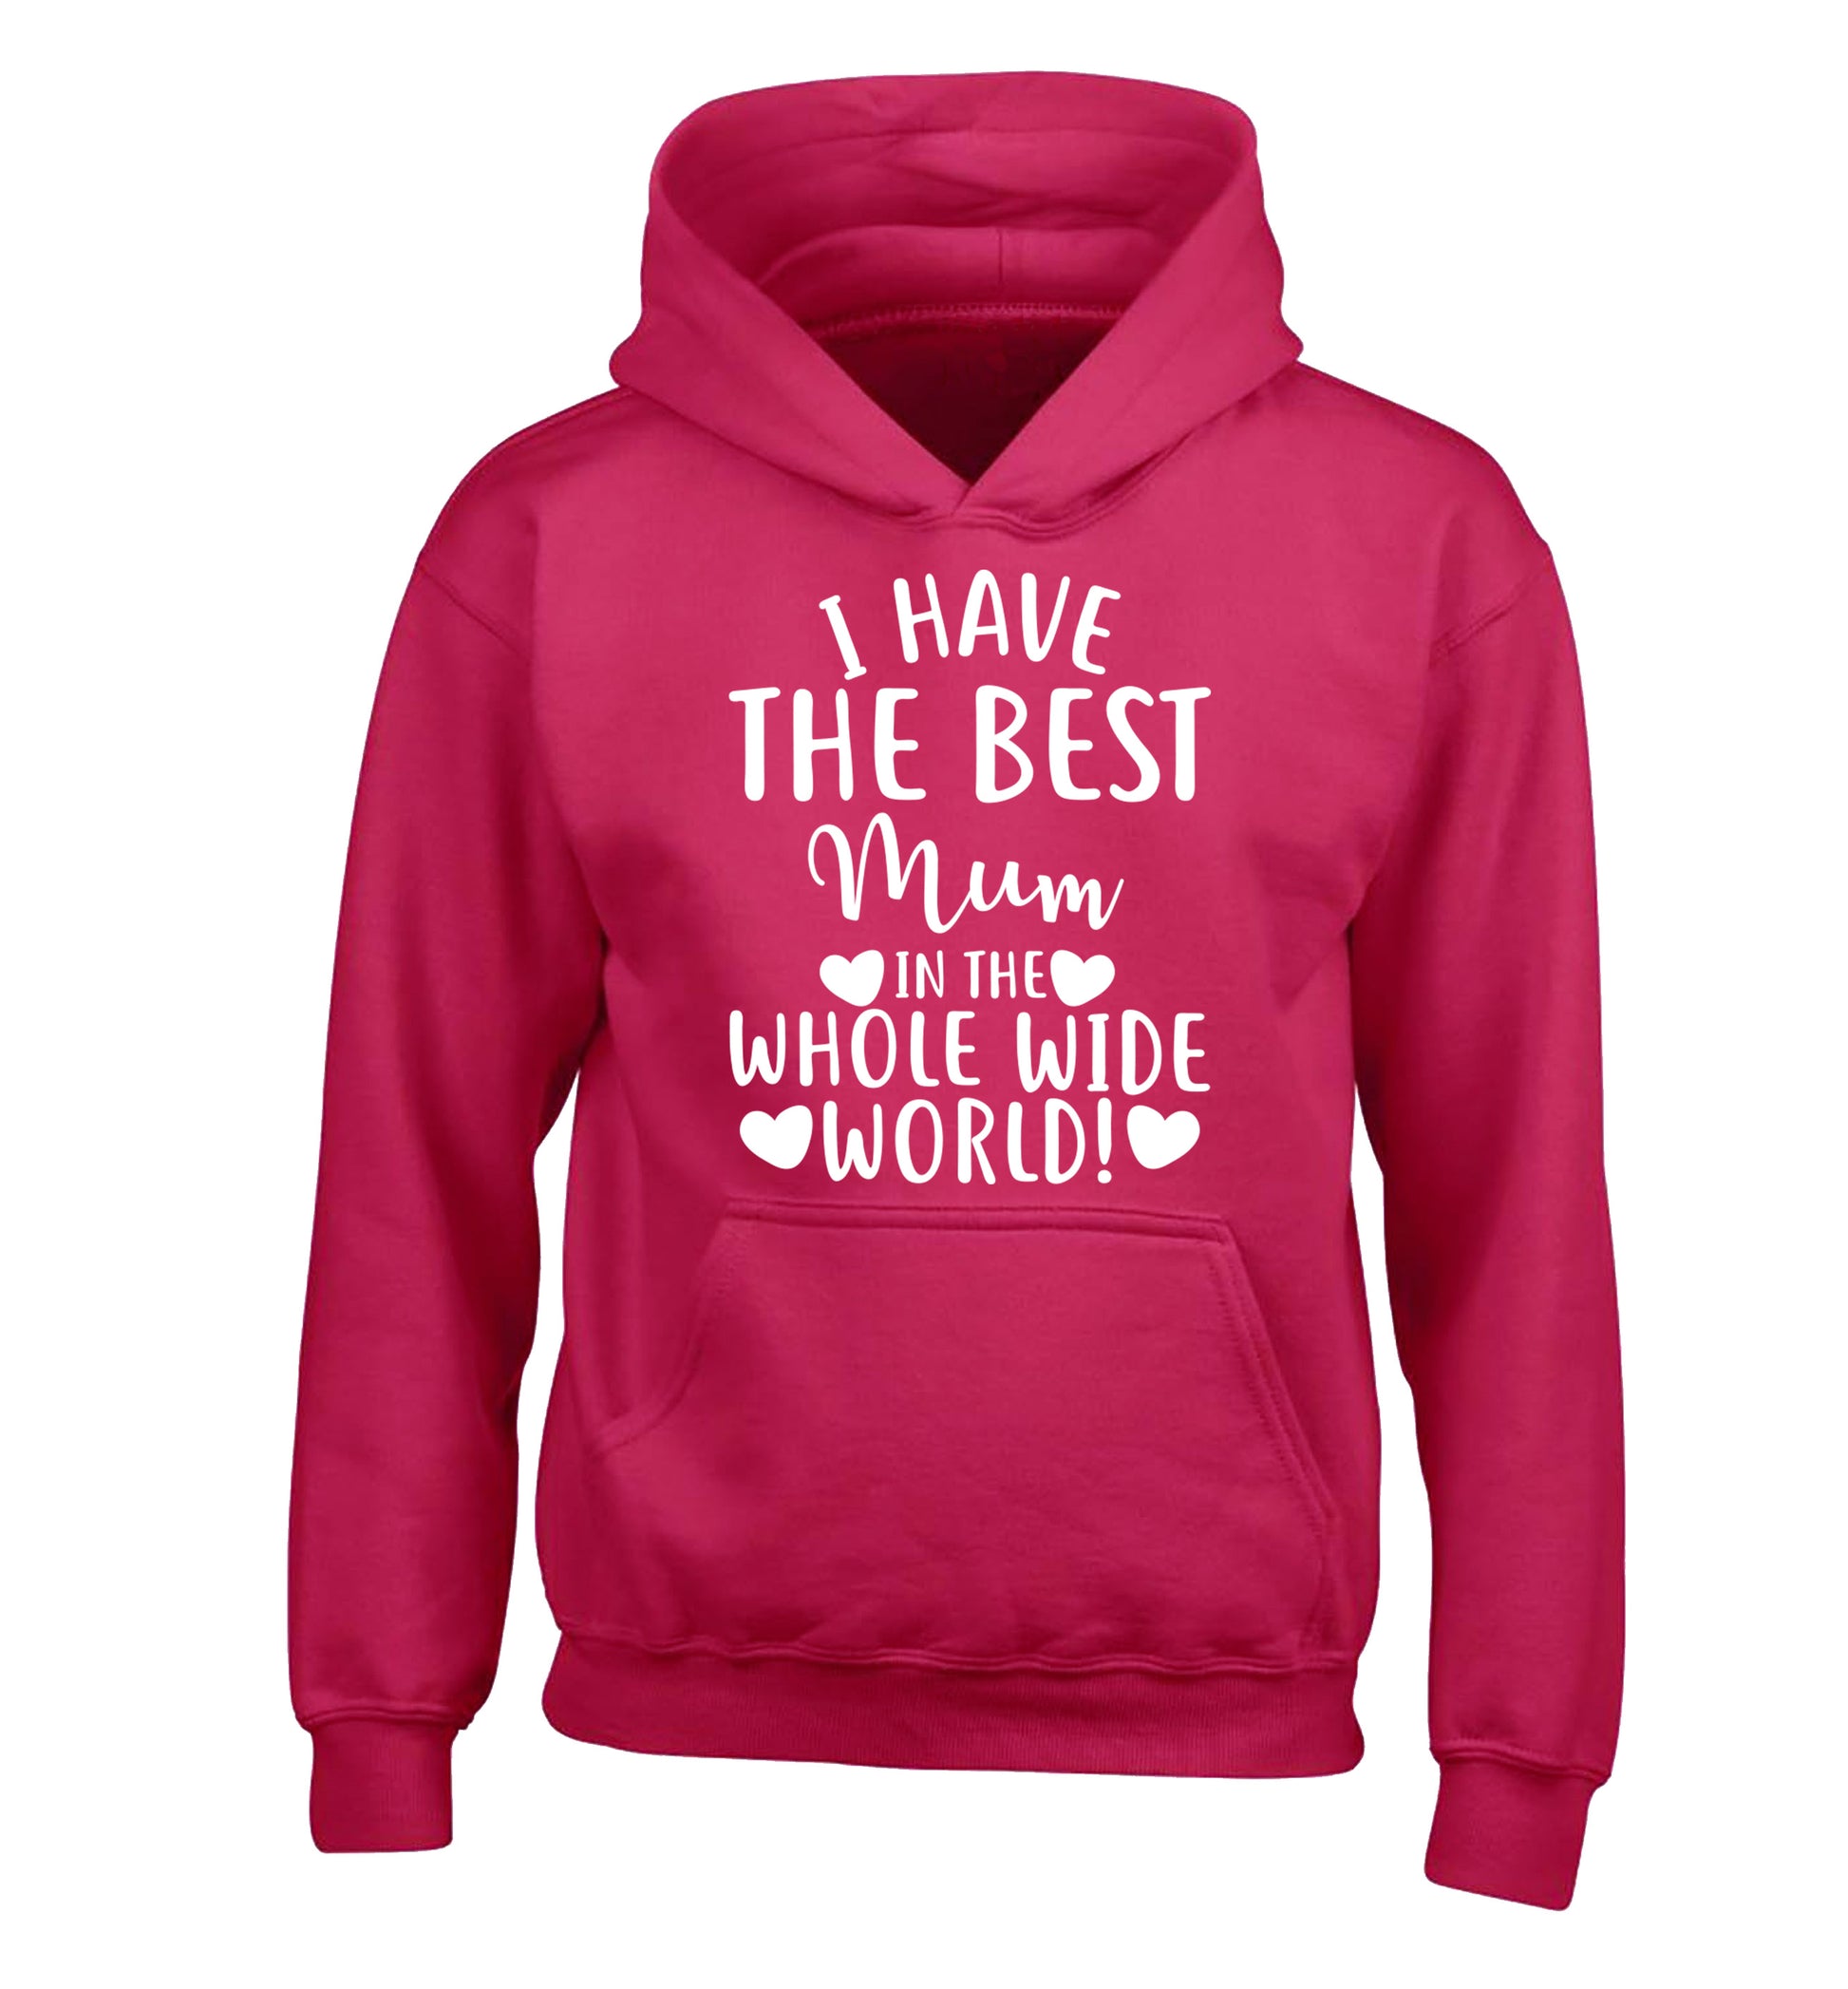 I have the best mum in the whole wide world! children's pink hoodie 12-13 Years